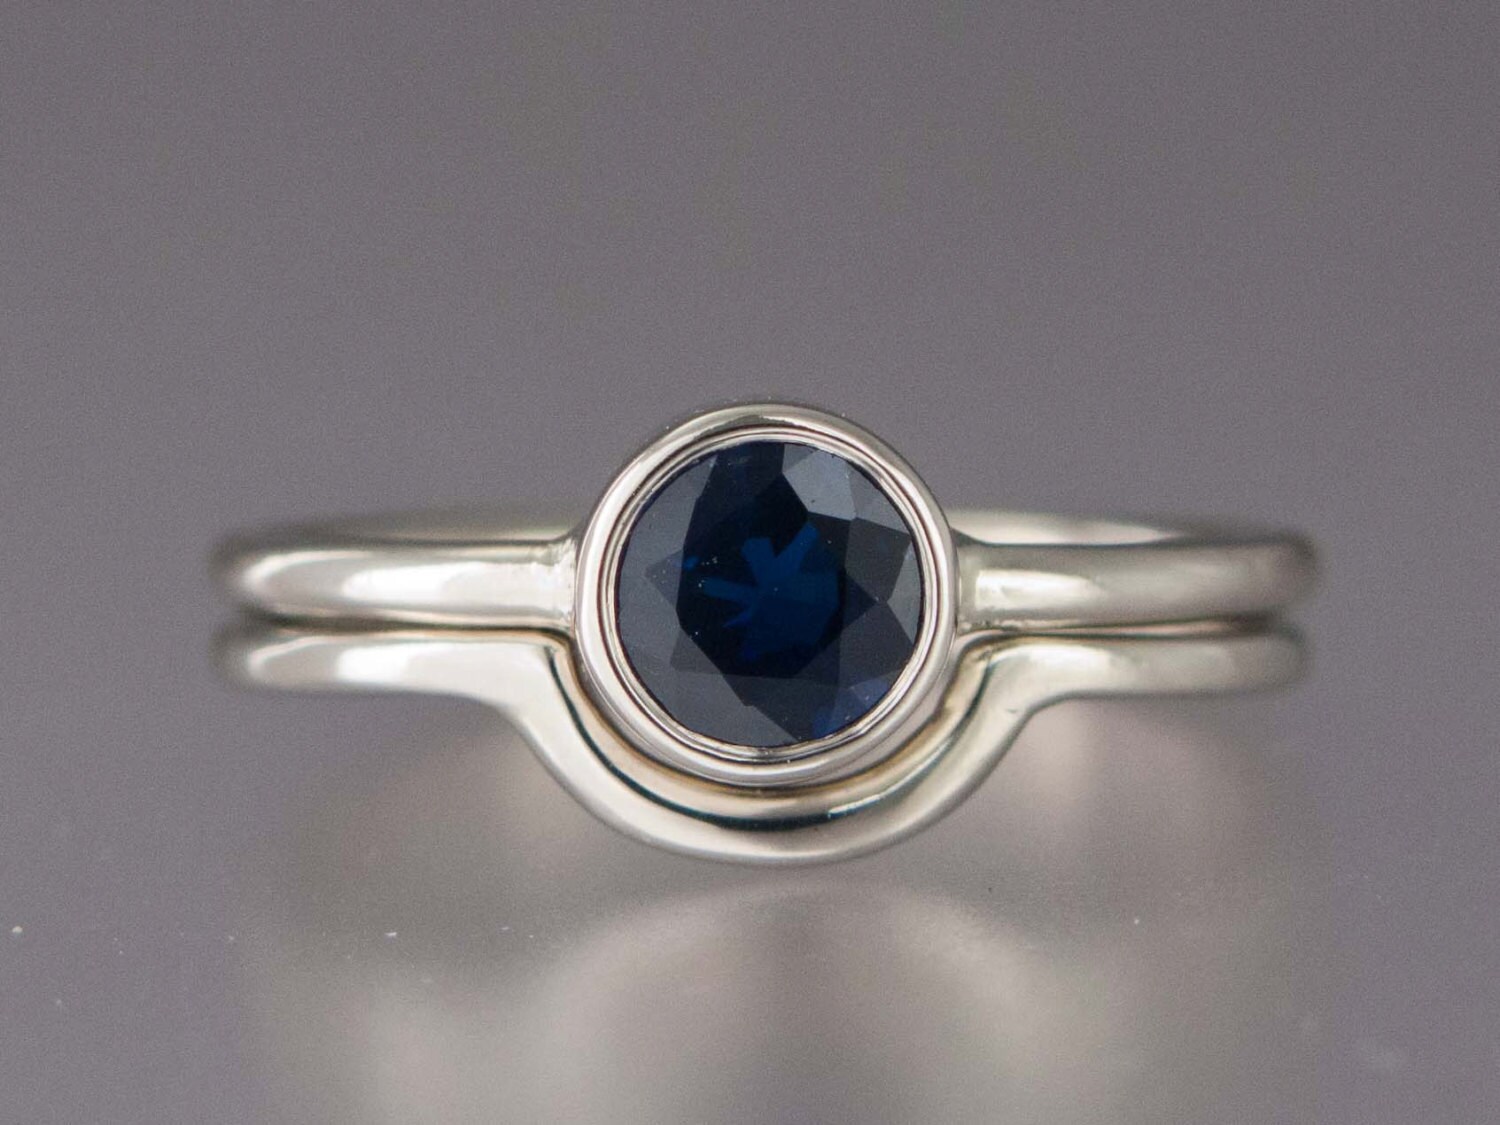 Blue Sapphire Engagement Ring and Contour Wedding Band Set - Etsy